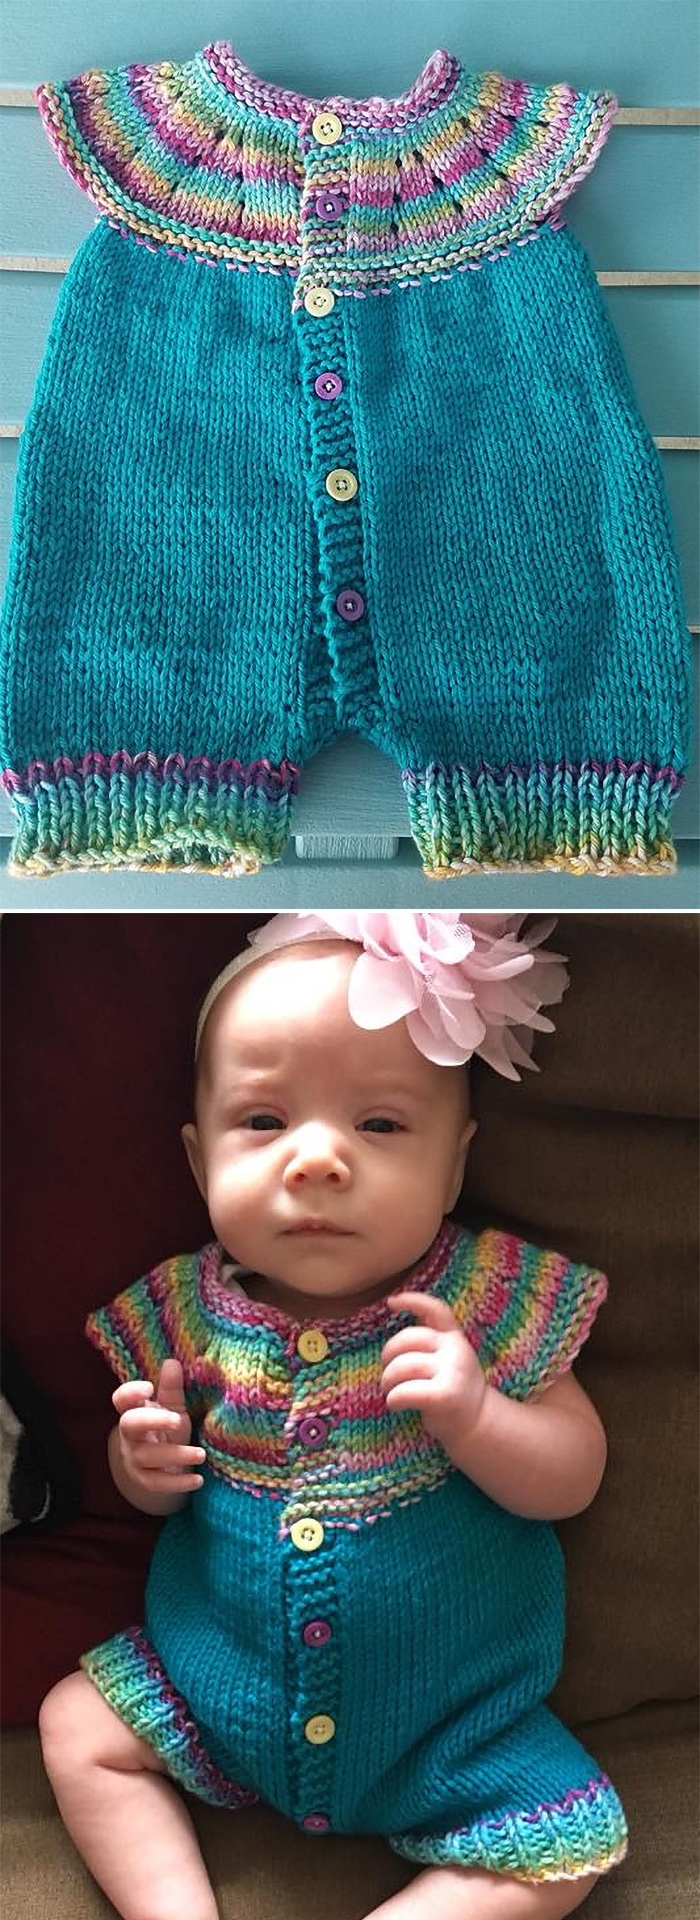 Free Knitting Pattern for Marianna's All-in-One Romper Suit